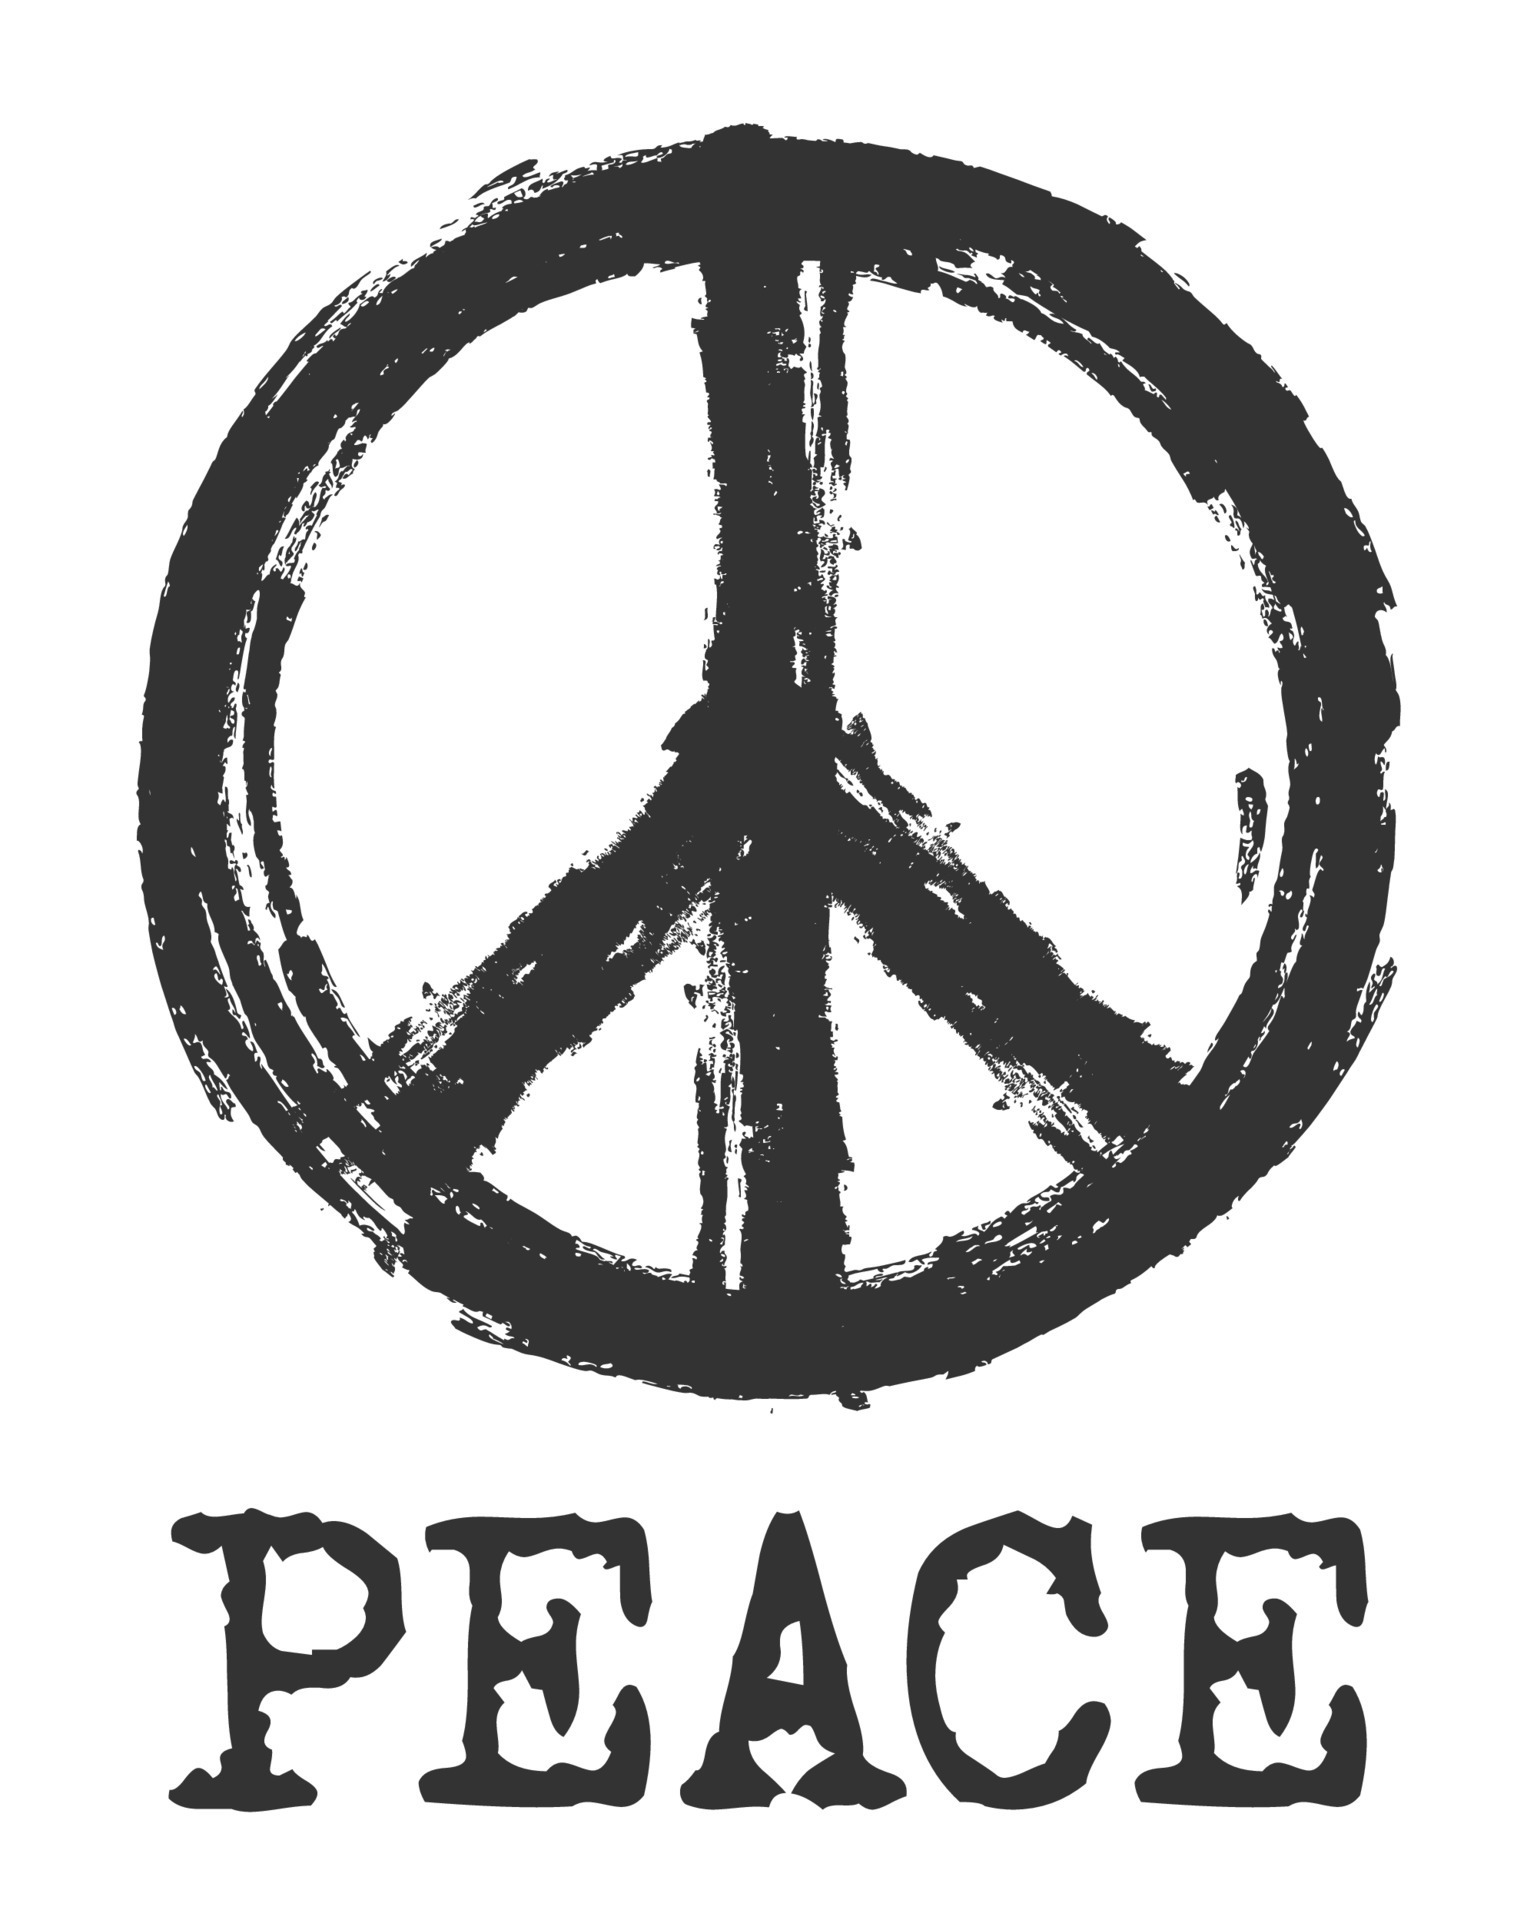 Peace symbol . Realistic hand drawn by chalk texture style . The ...